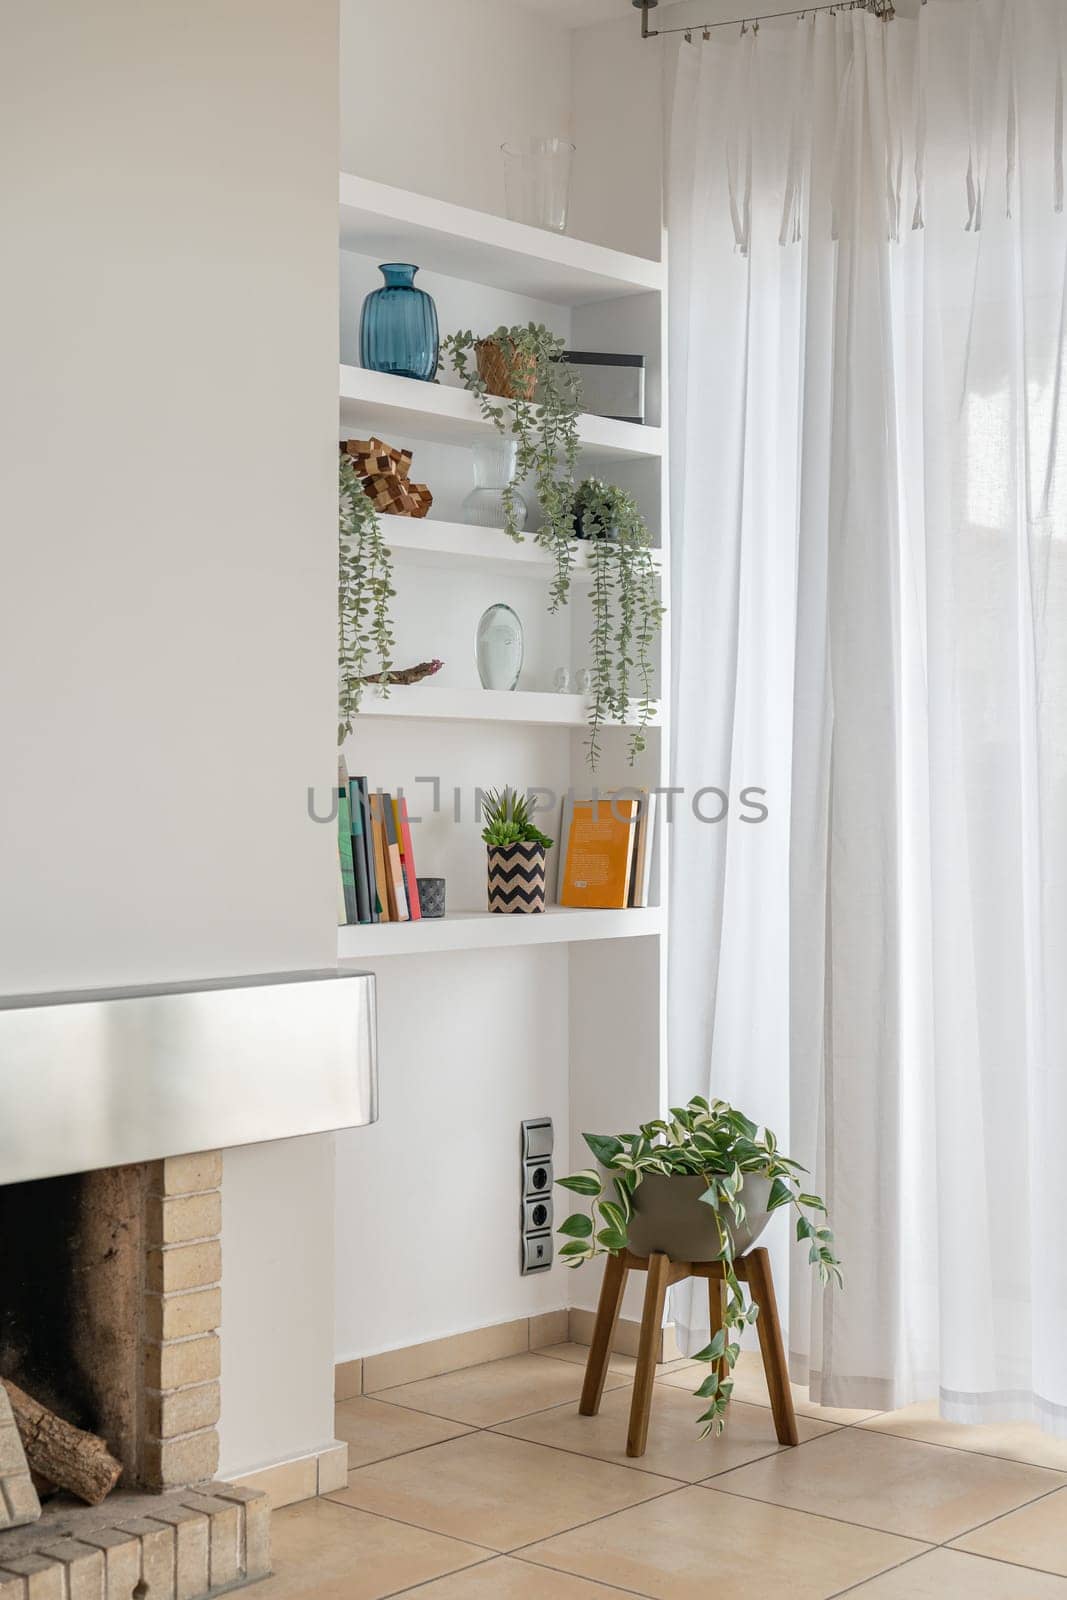 Shelving unit with pot plants and items in living room by apavlin